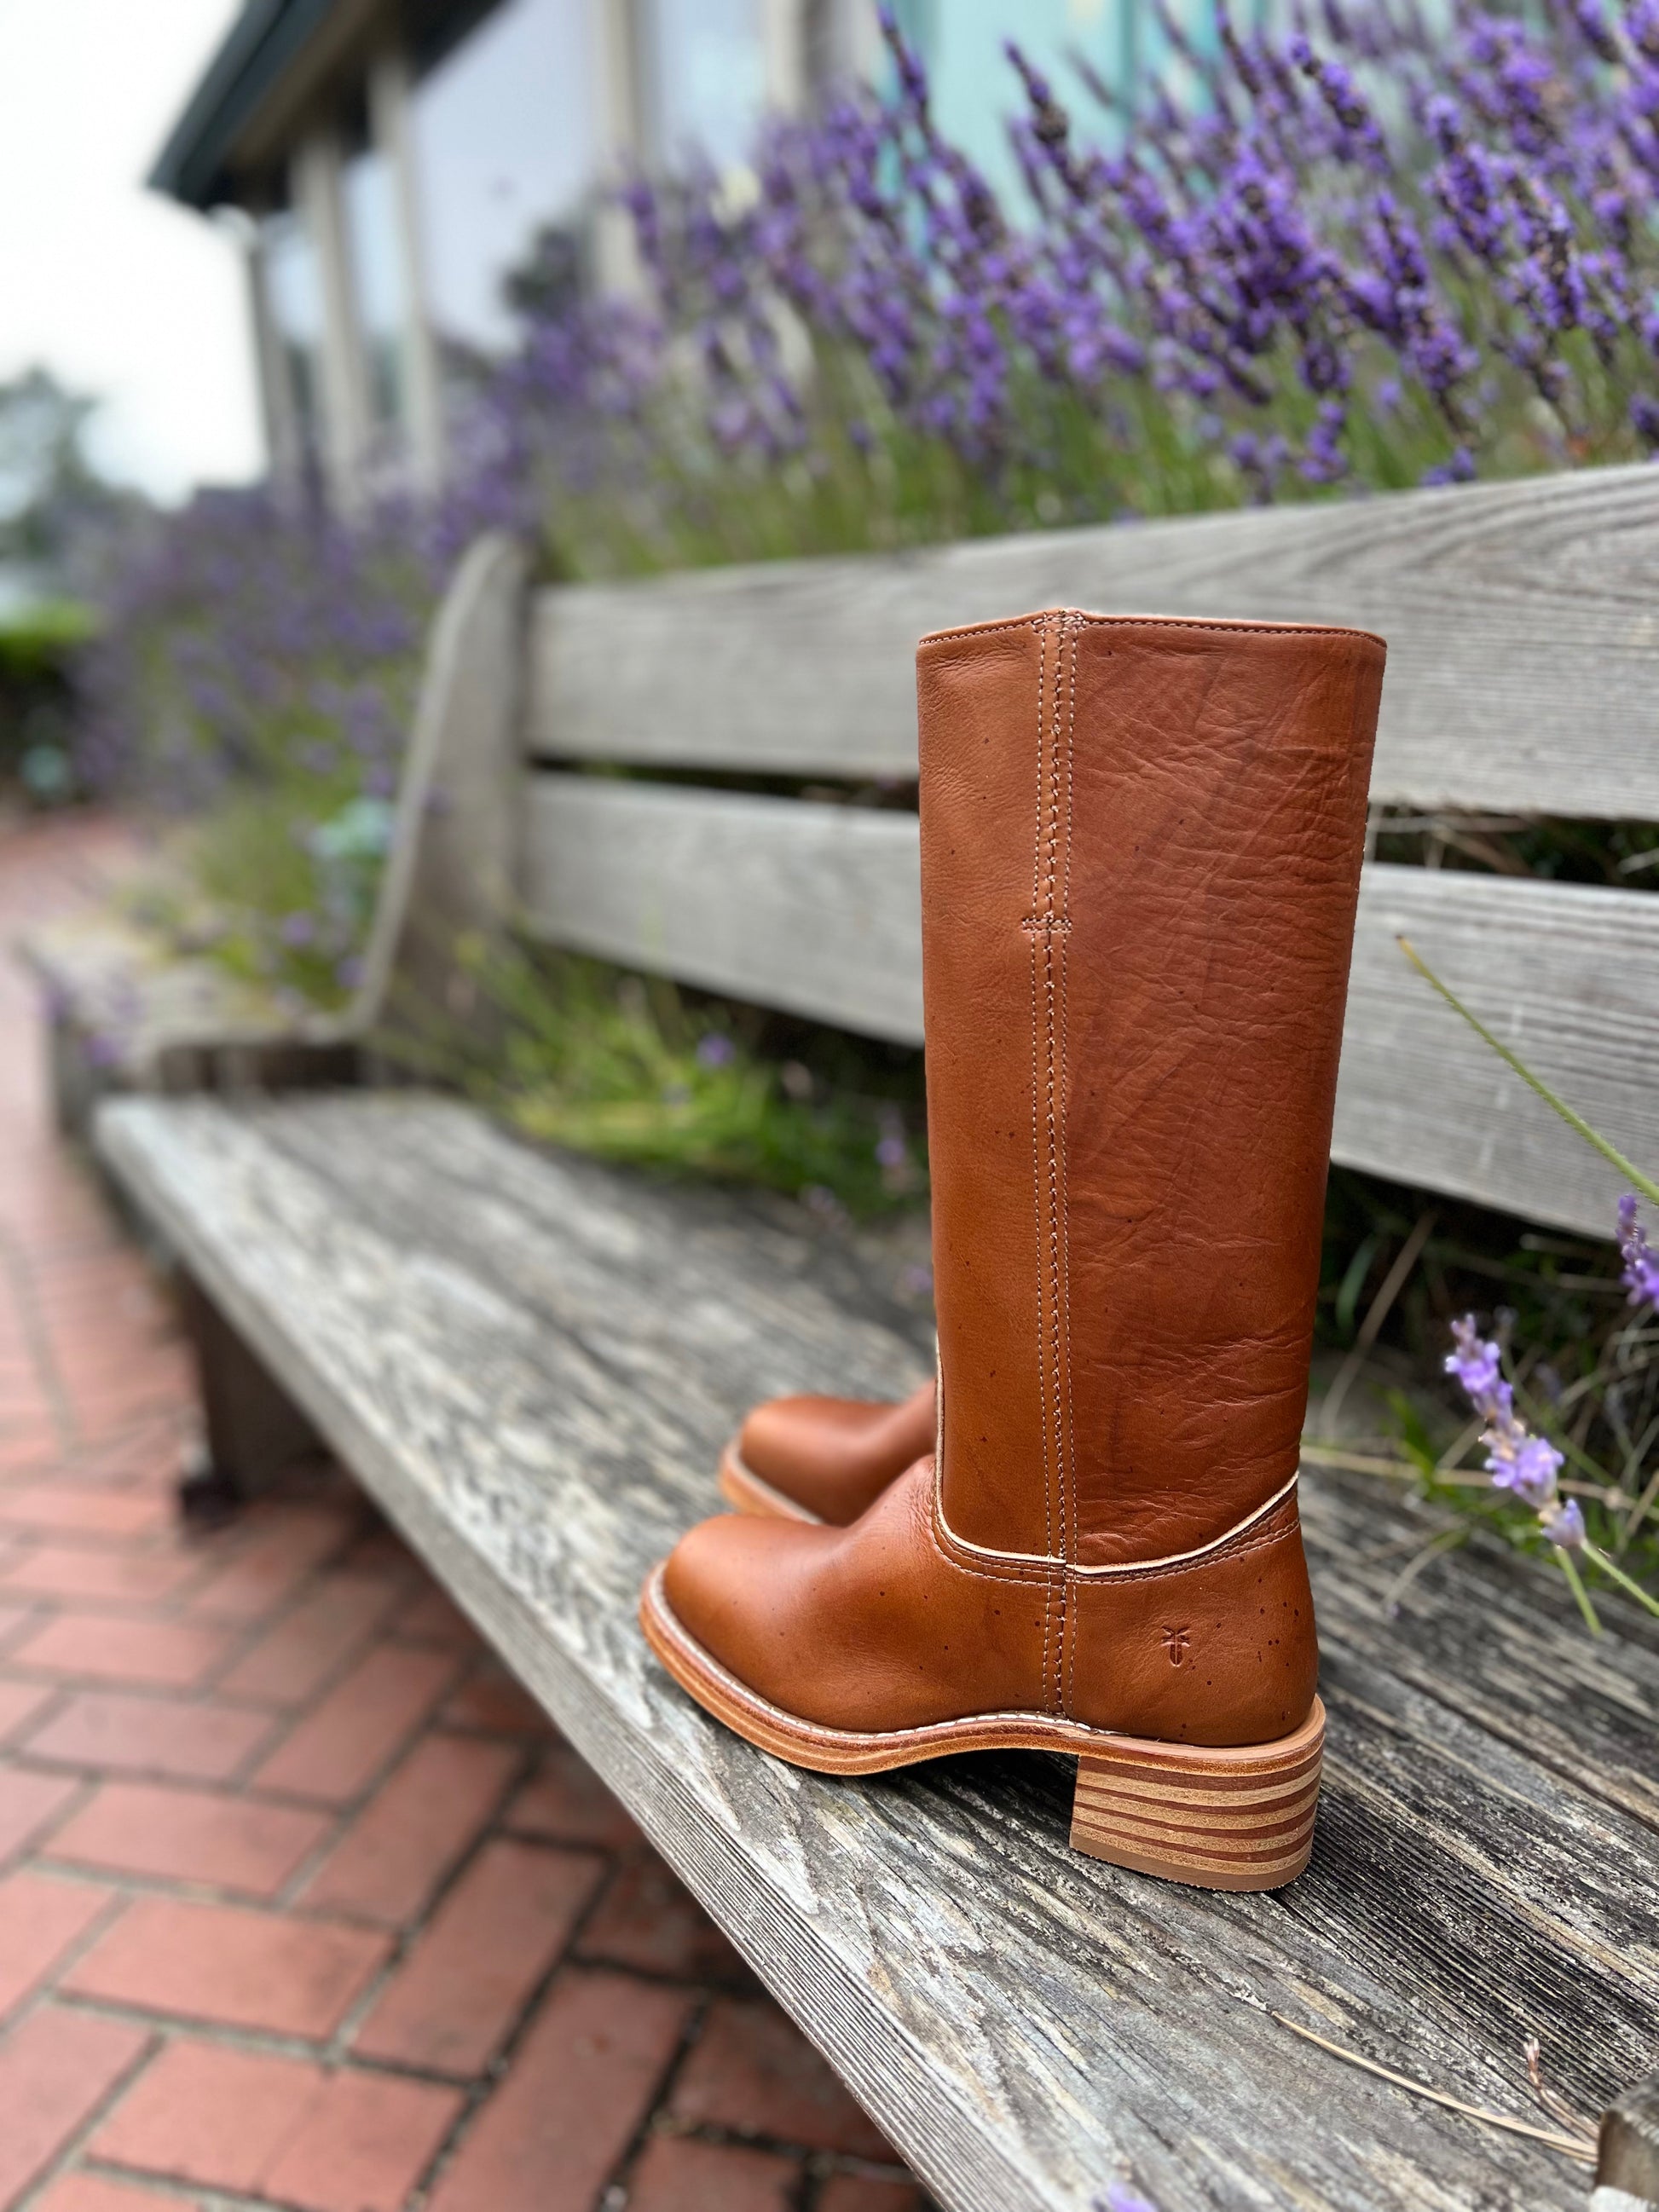 Frye Campus Leather Boot - Saddle styled in the wild